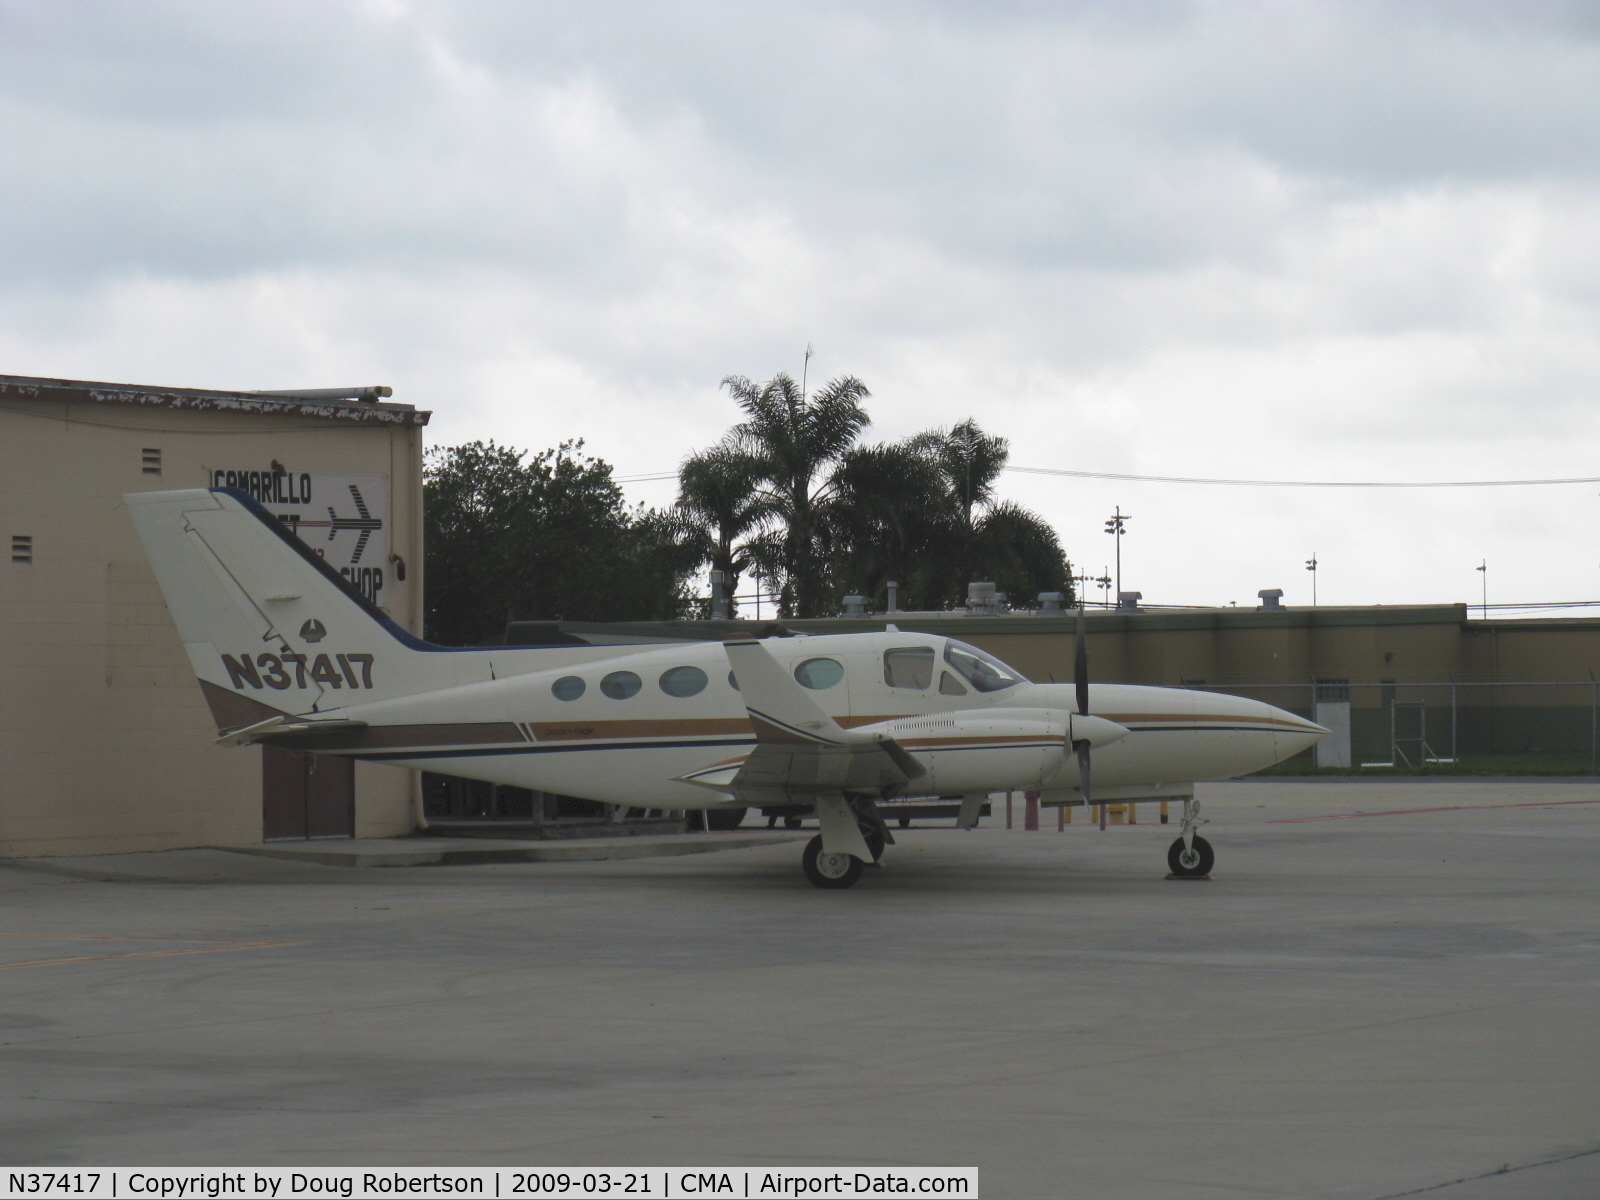 N37417, 1977 Cessna 421C Golden Eagle C/N 421C0344, 1977 Cessna 421C III GOLDEN EAGLE, two Continental GTSIO-520-F,-K 435 Hp each at 3,400 rpm, bonded wet wing